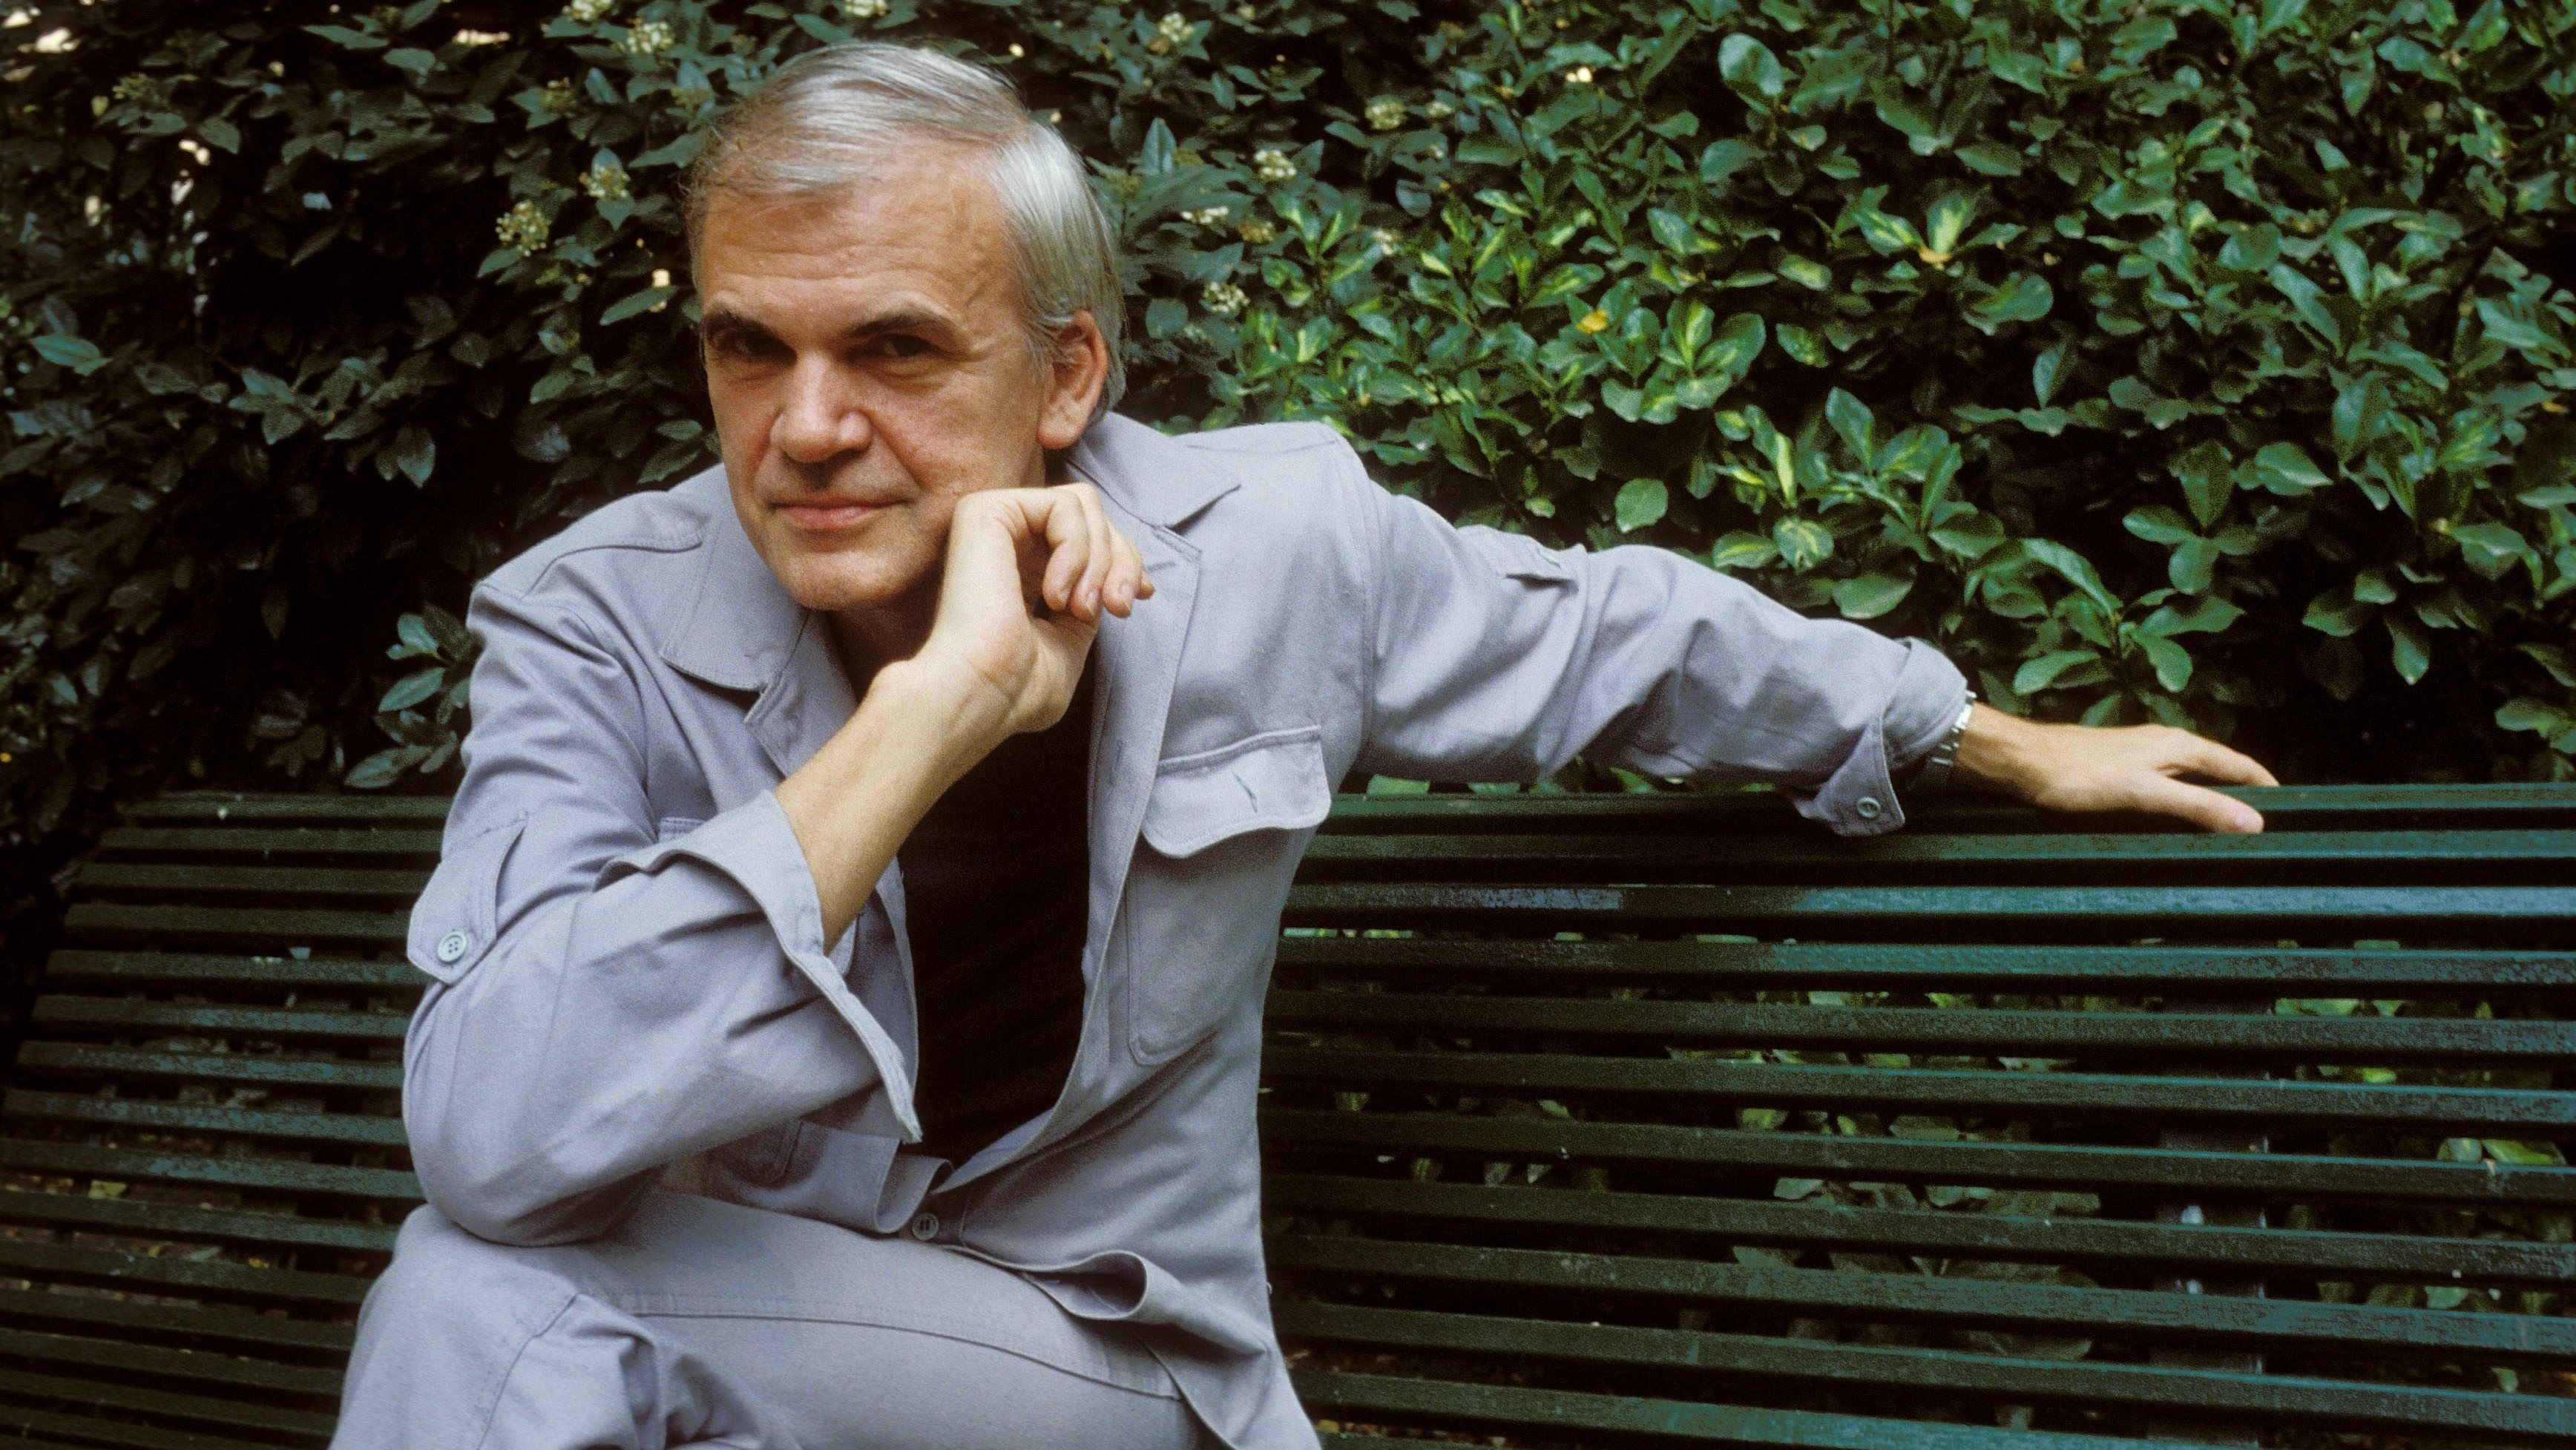 The close-up of Milan Kundera, NB 186204, in Paris, France on August 02nd, 1984